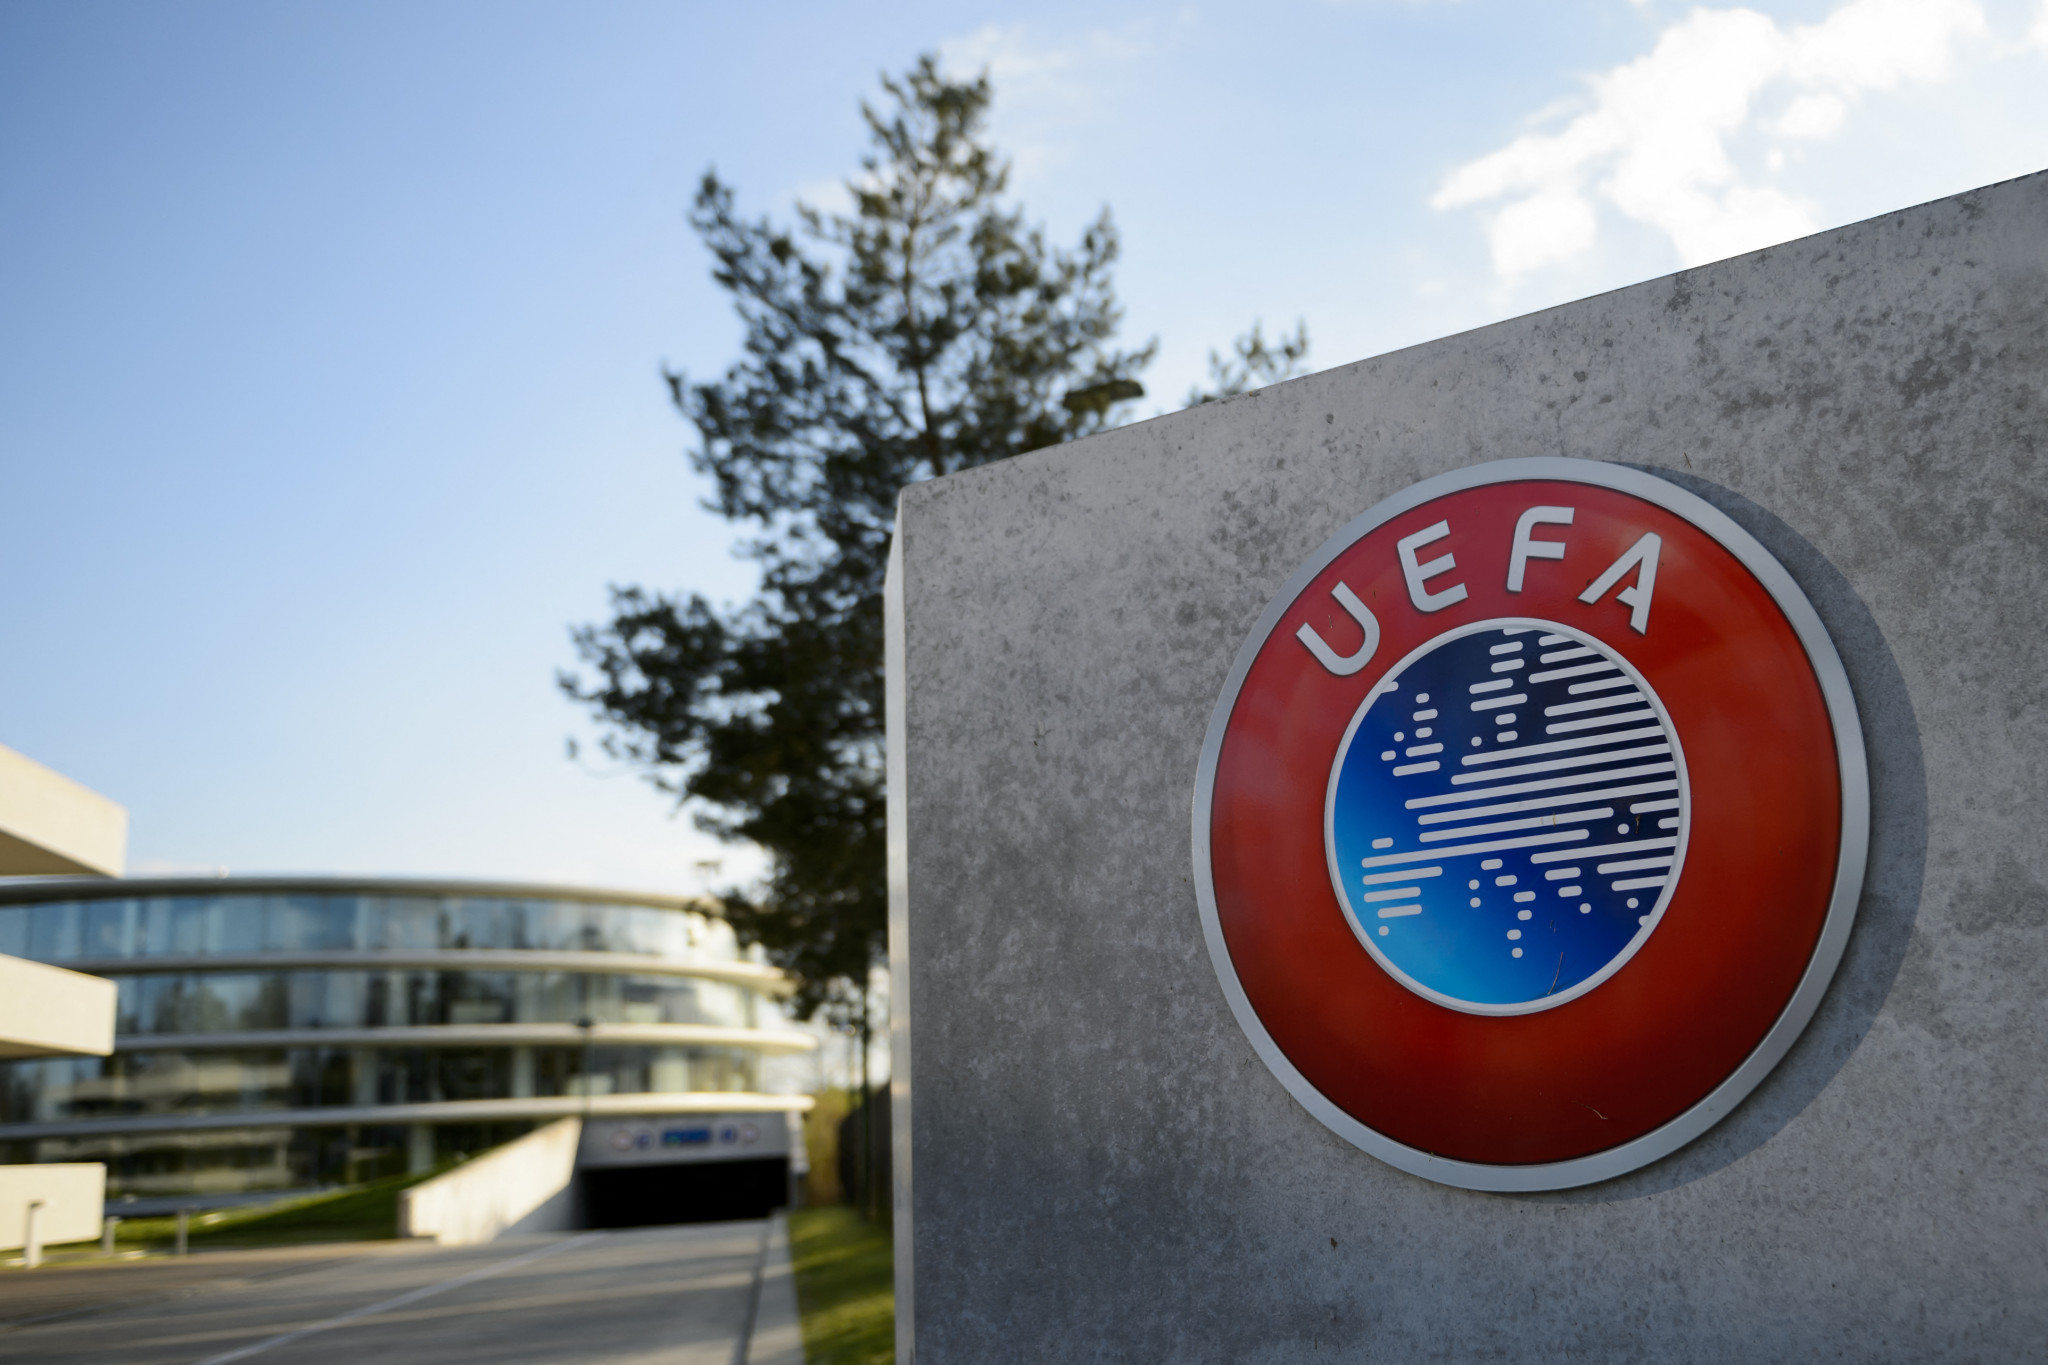 UEFA denies involvement in development tournaments in Russia after RFU claims